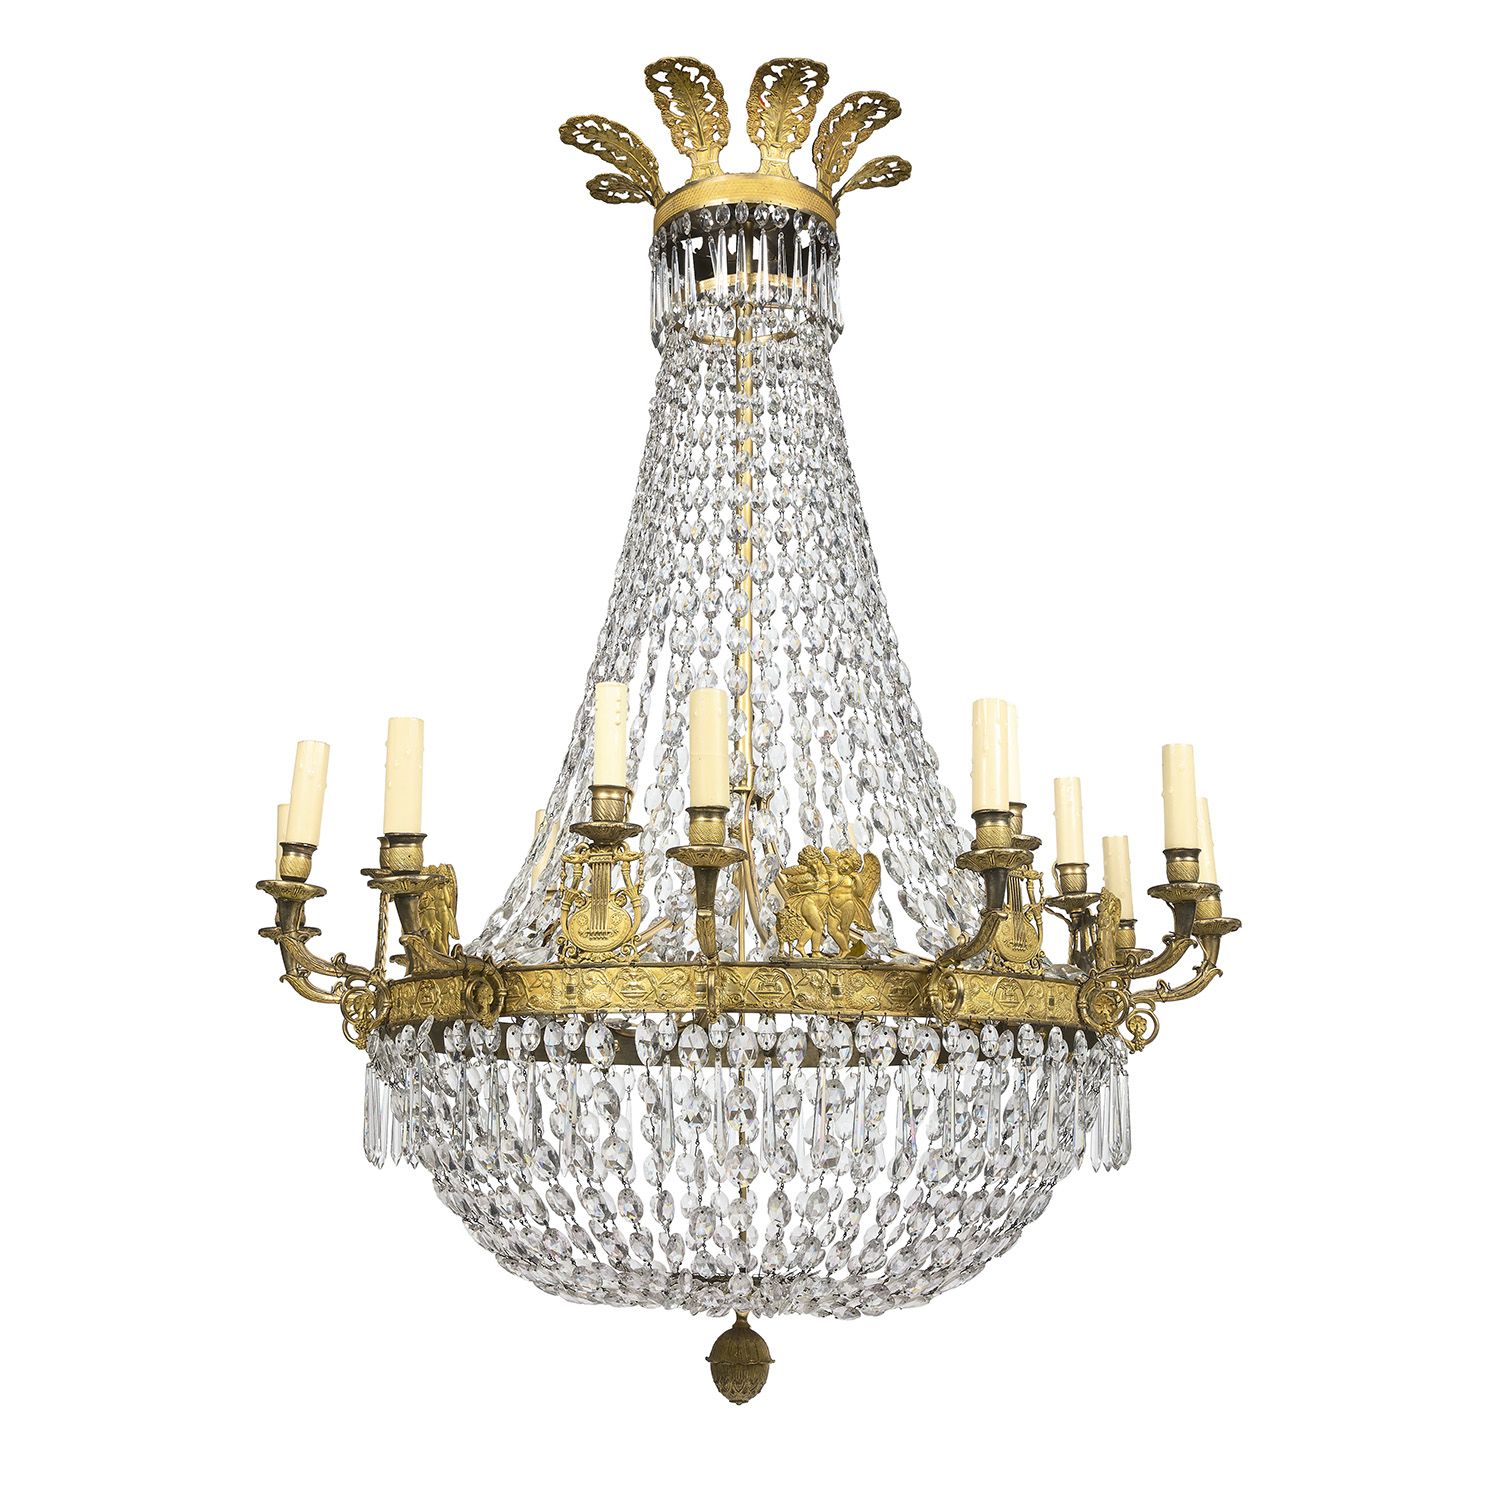 Null BASKET CHANDELIER, EMPIRE PERIOD
in gilded and chased bronze; composed of a&hellip;